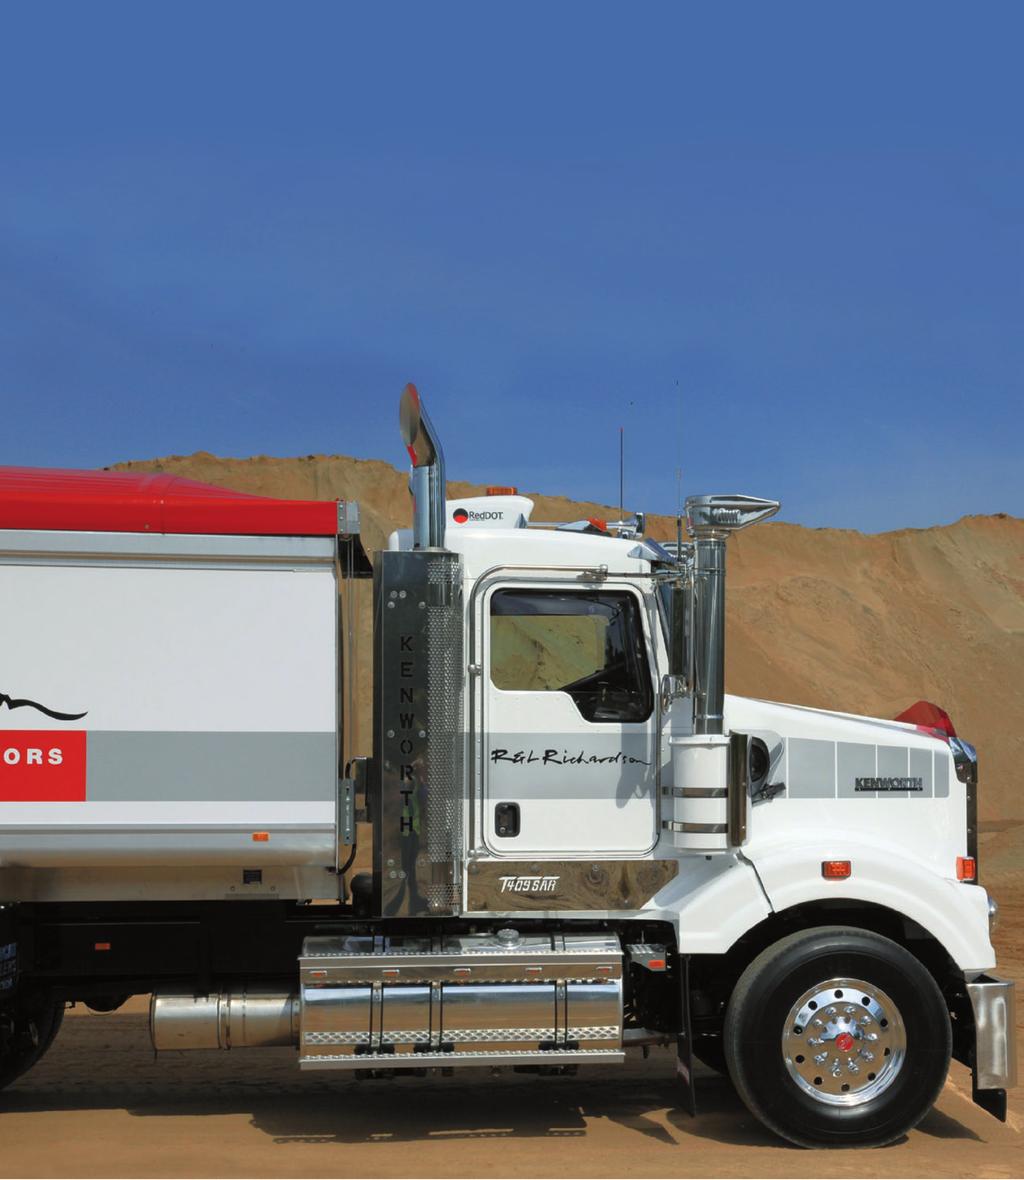 The longer the drivers stay and enjoy their job, the happier it is for everyone. By giving them the Kenworth/Cummins combination to drive, we re 90 per cent of the way there.